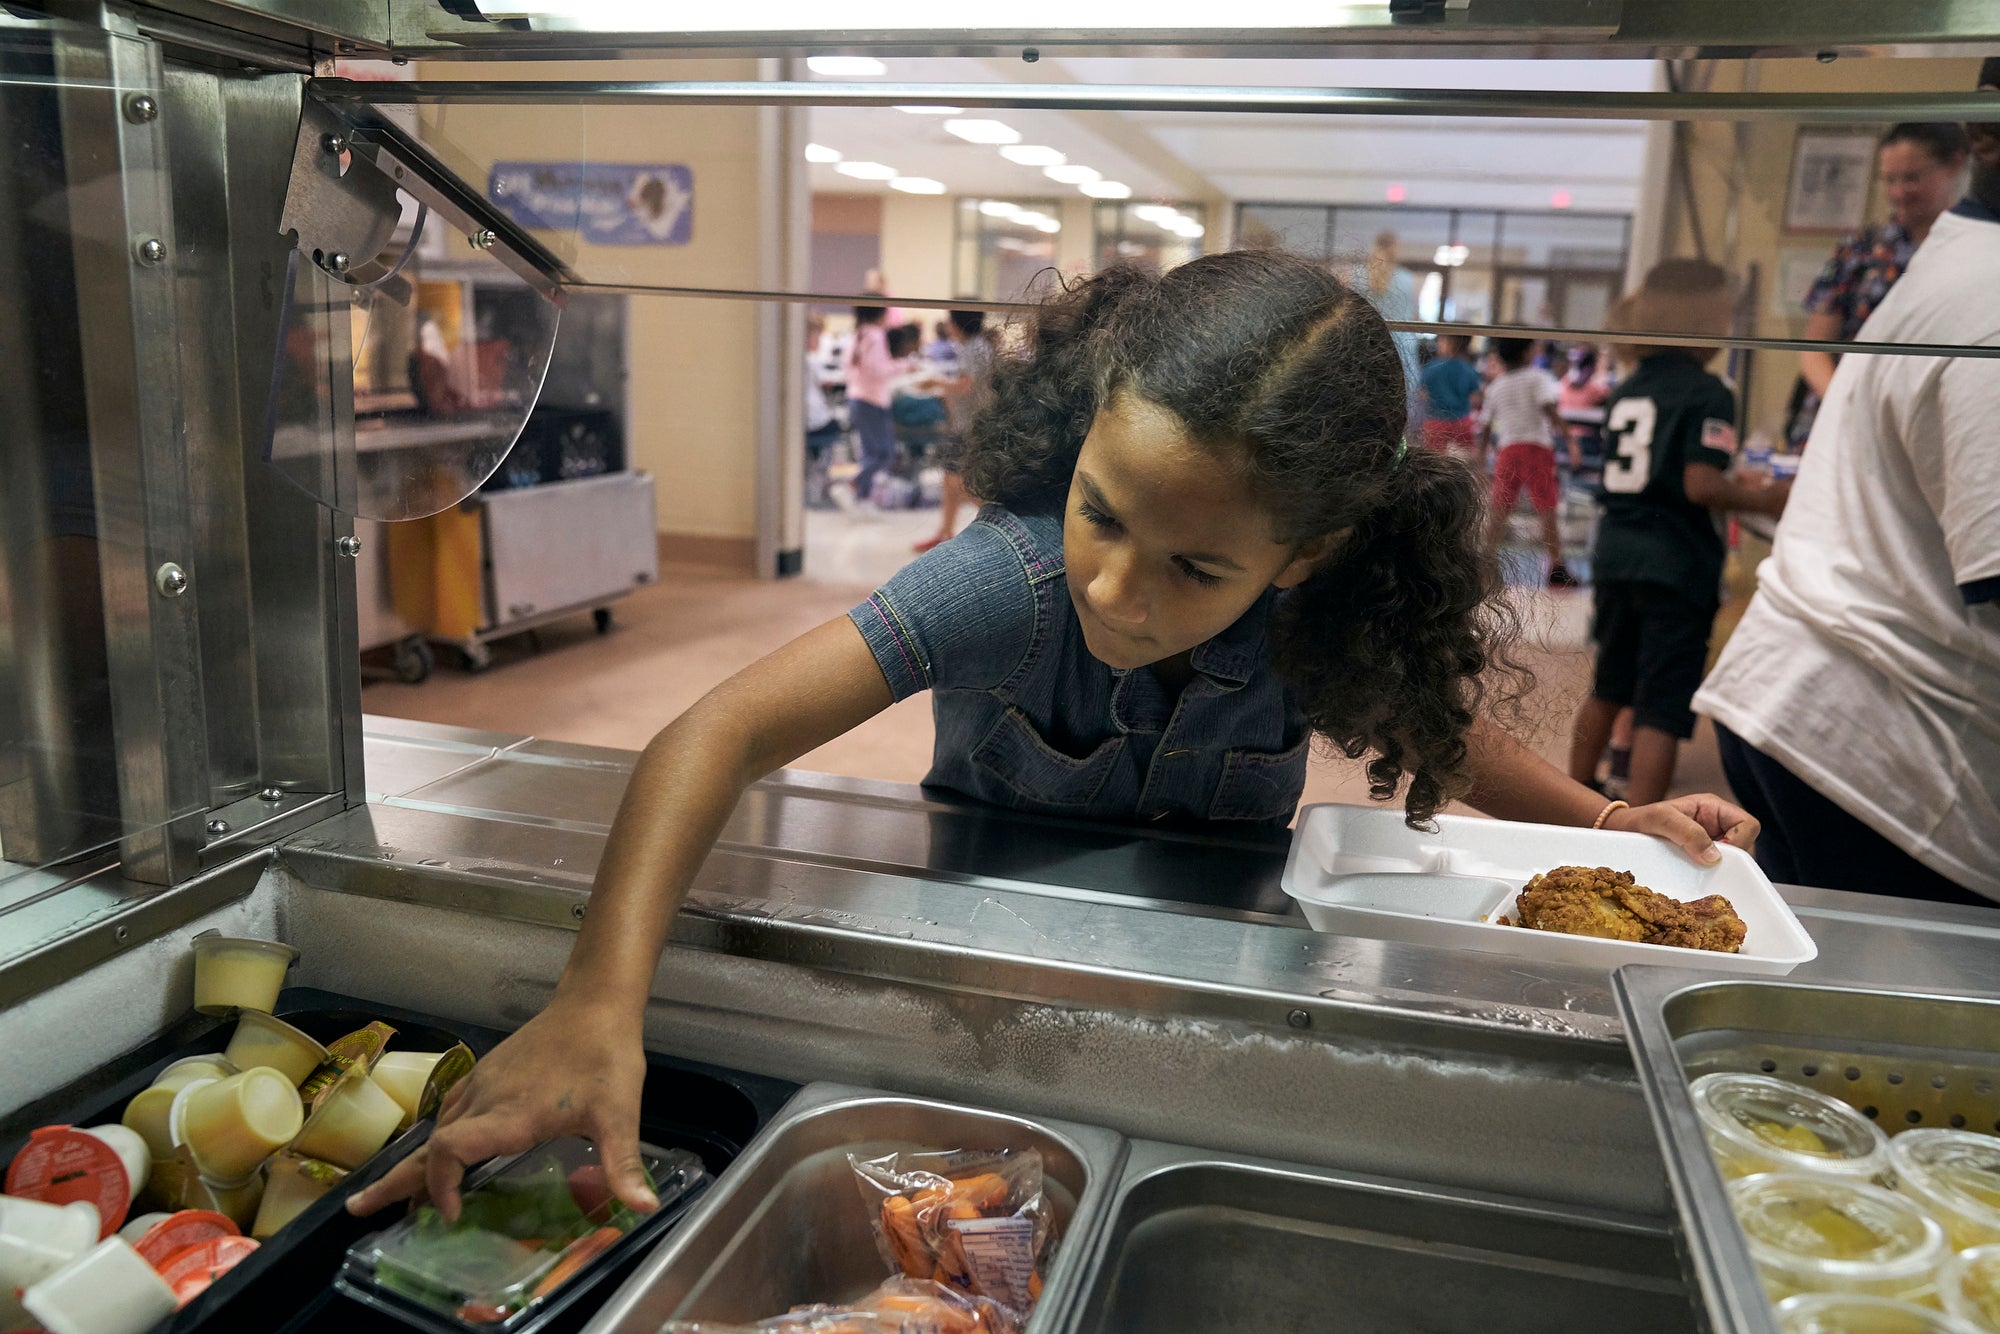 A student chooses among lunch options at East Brainerd Elementary School in Chattanooga, Tennessee.